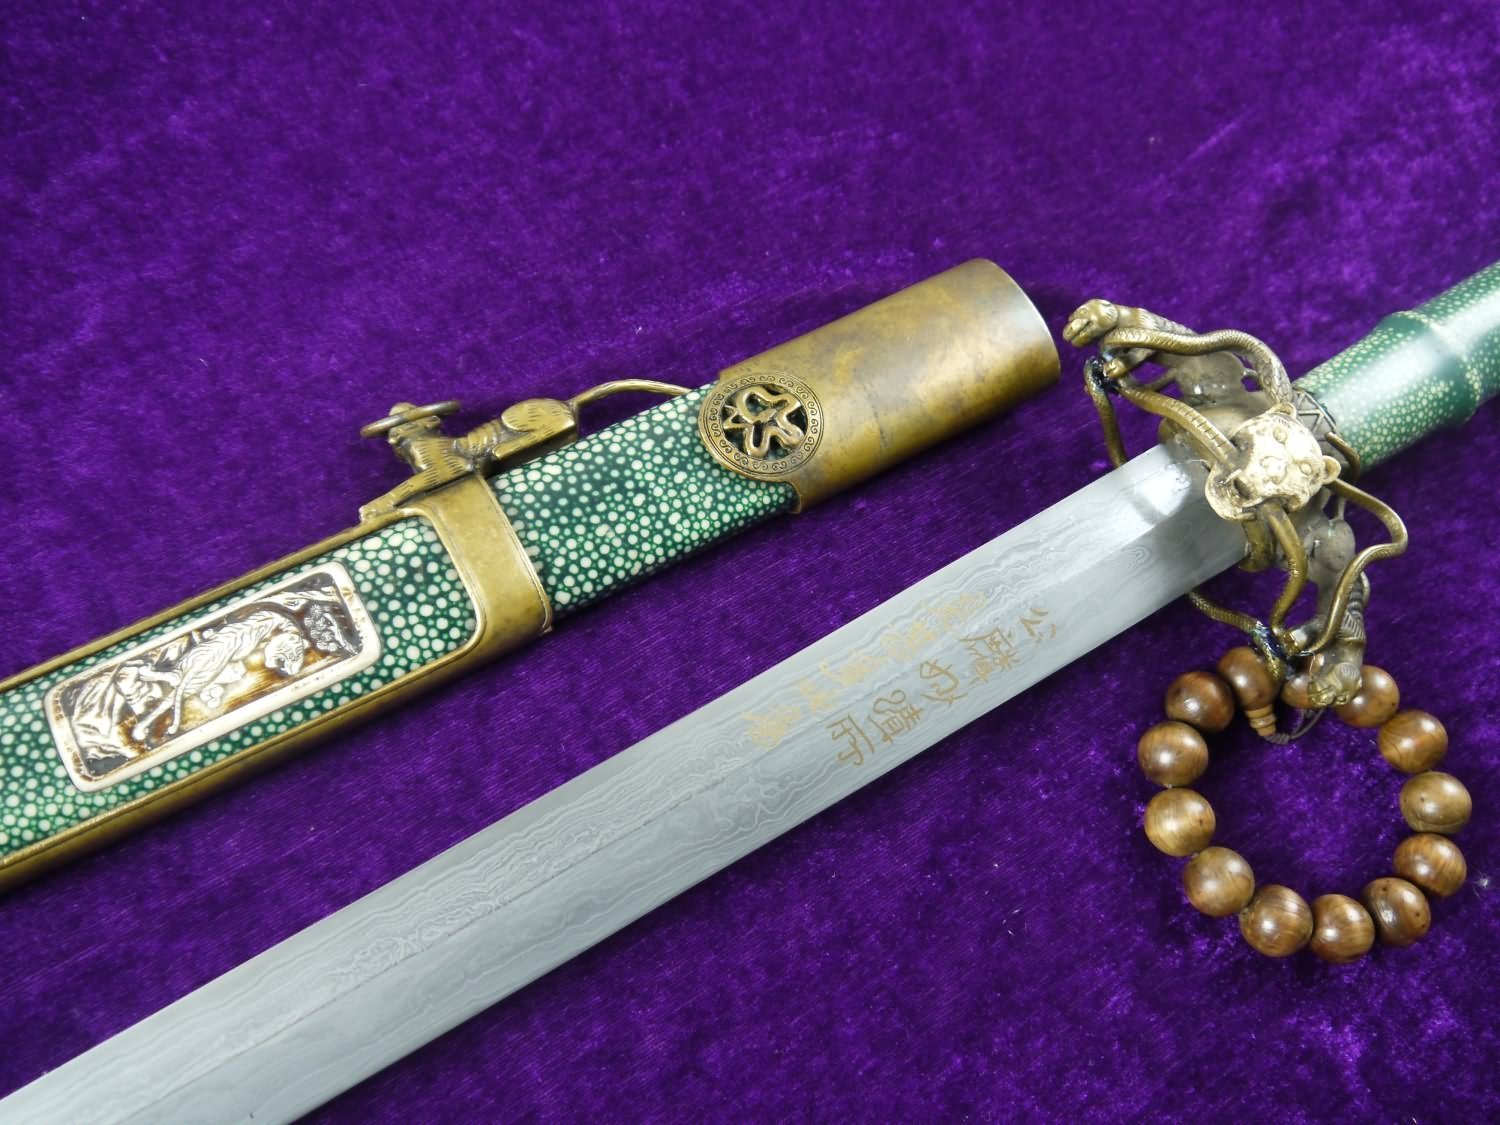 Snake-like sword/Damascus steel blade/Pearl skin wrapped scabbard/Brass fitted/Length 39" - Chinese sword shop